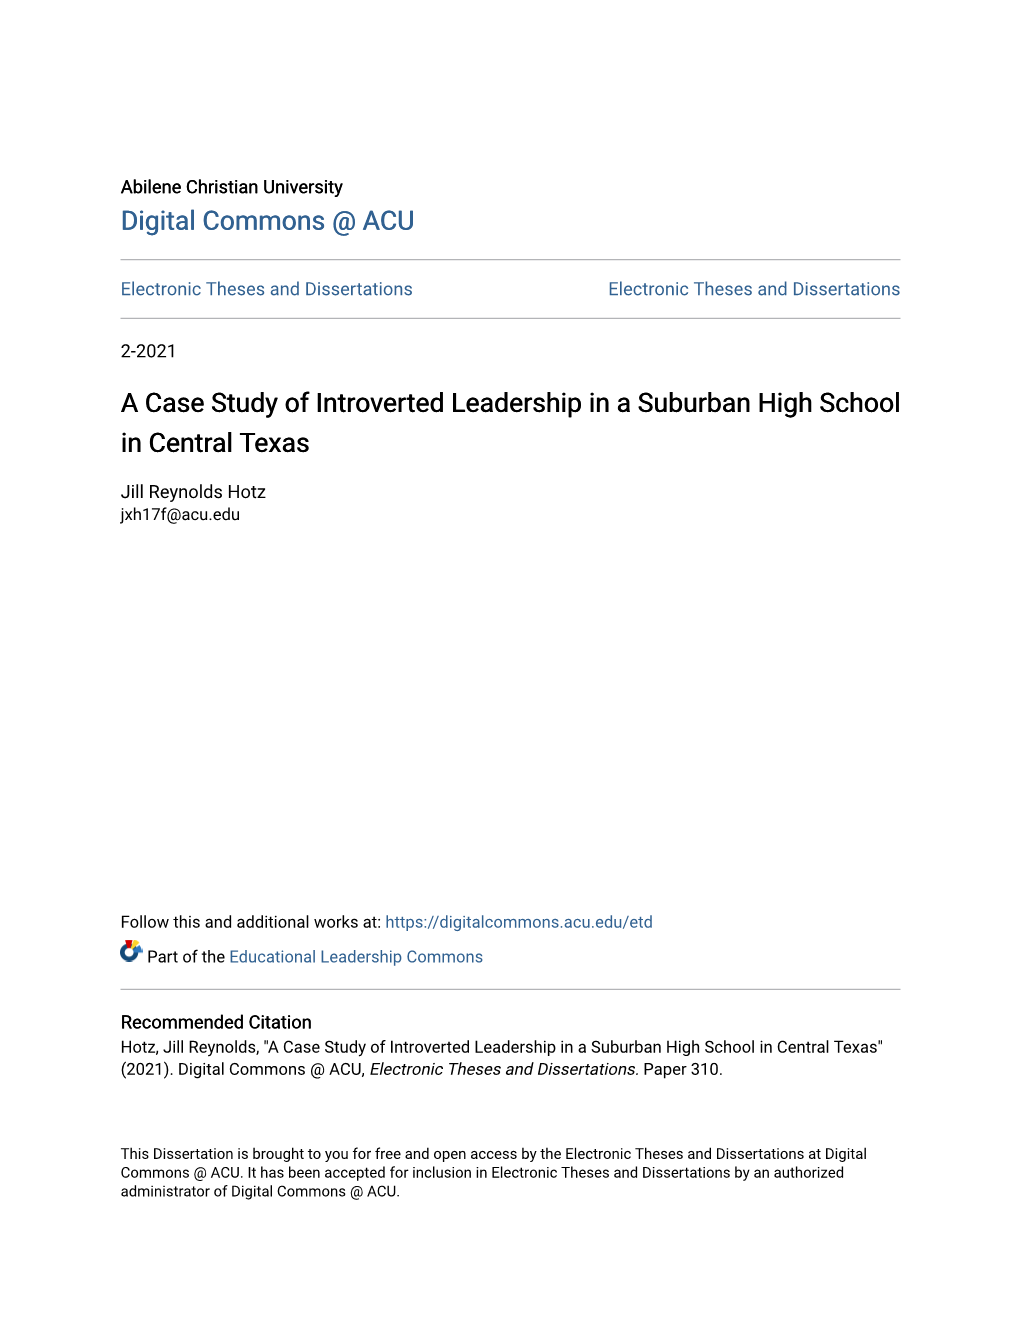 A Case Study of Introverted Leadership in a Suburban High School in Central Texas